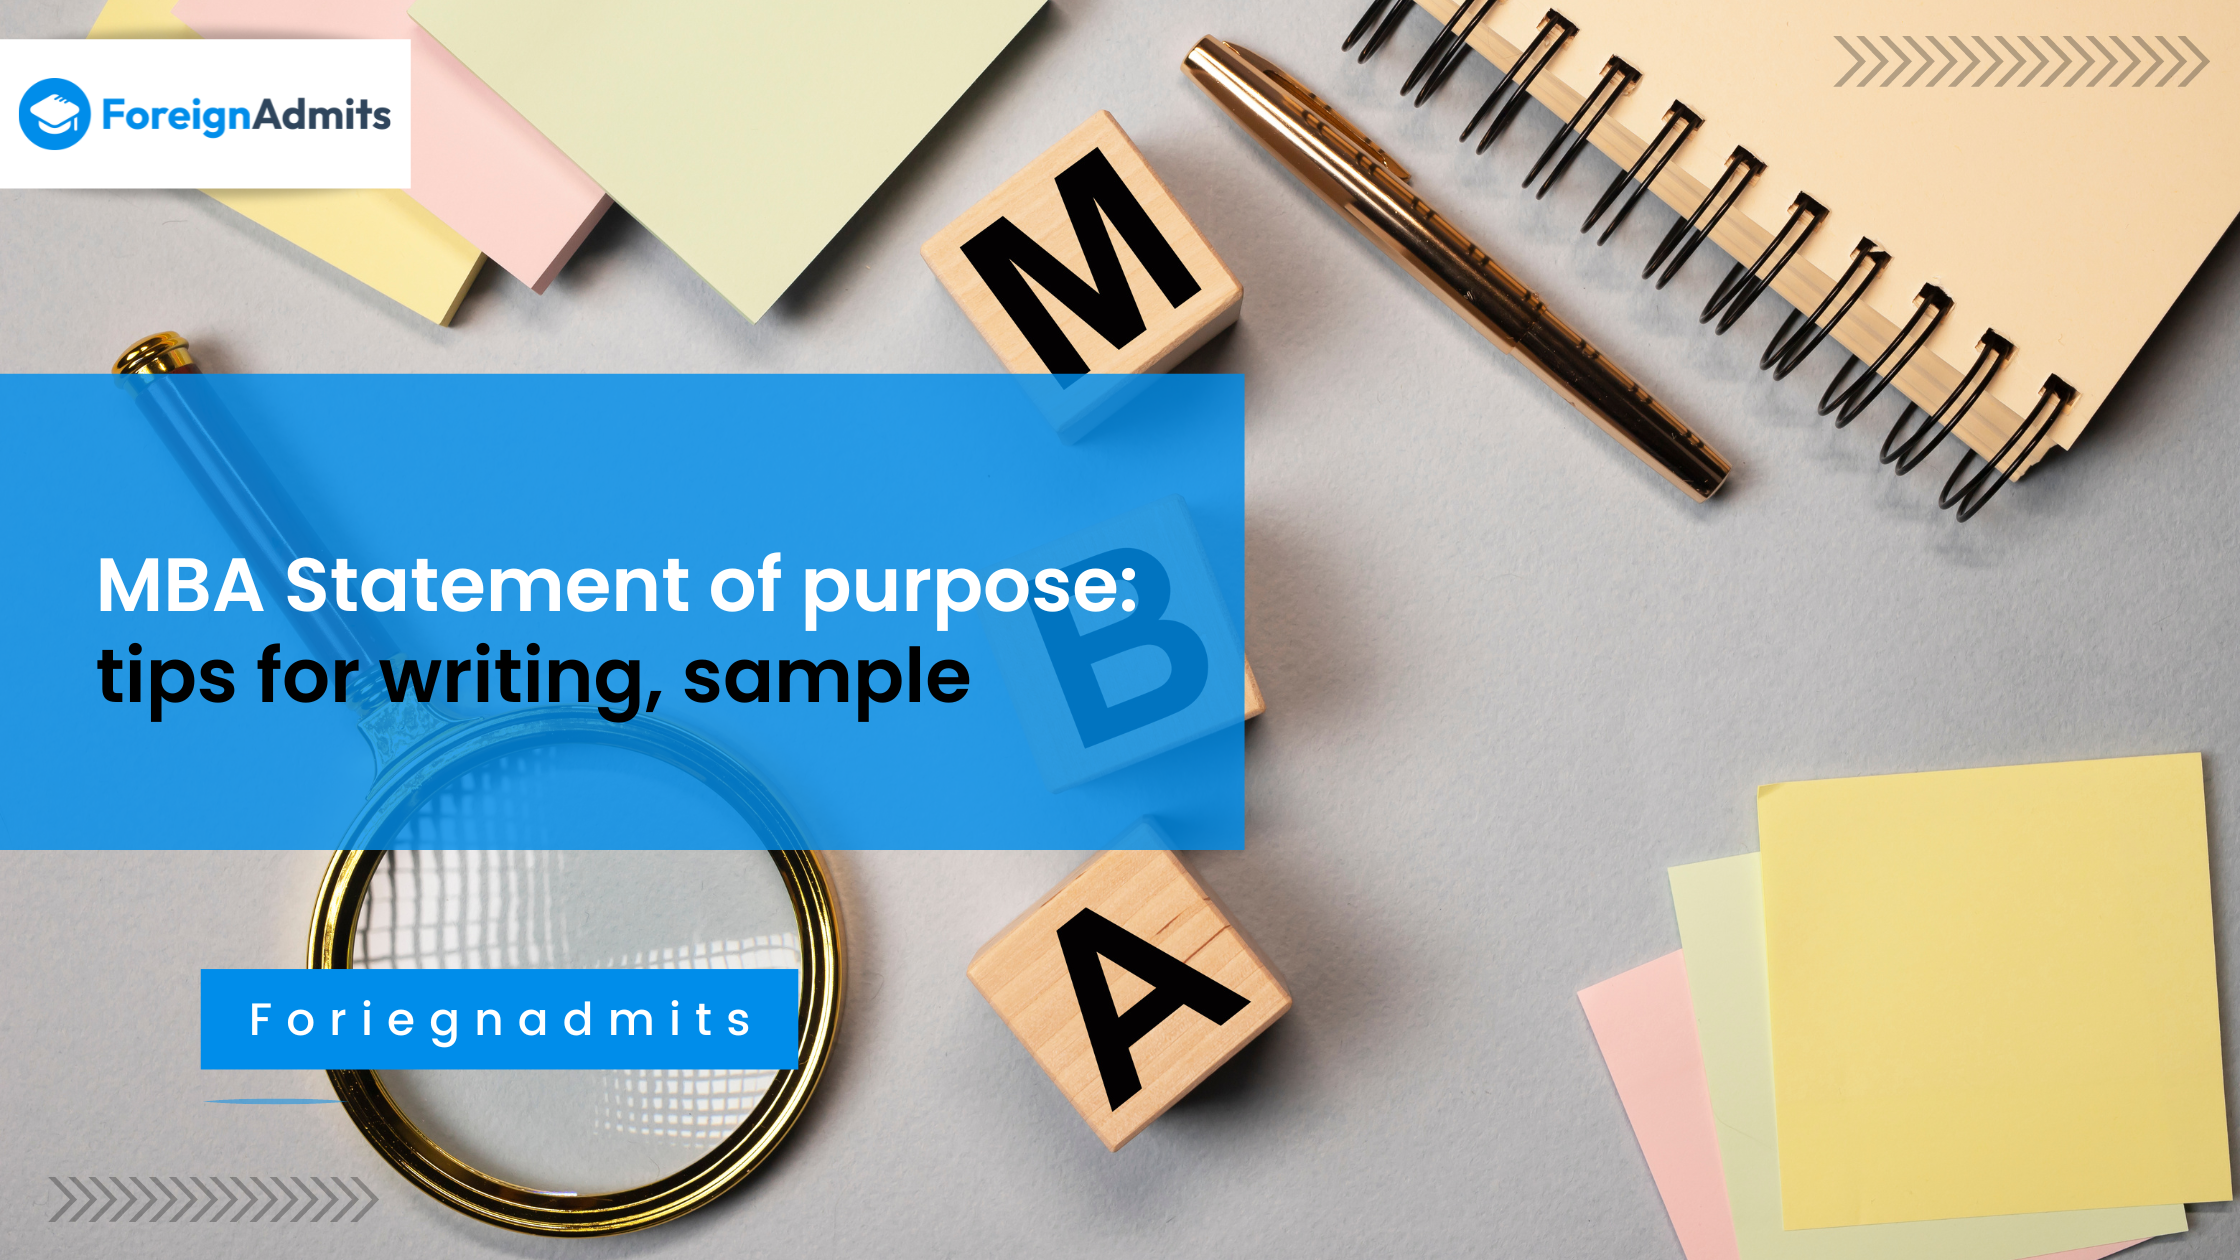 MBA Statement of purpose: tips for writing, sample